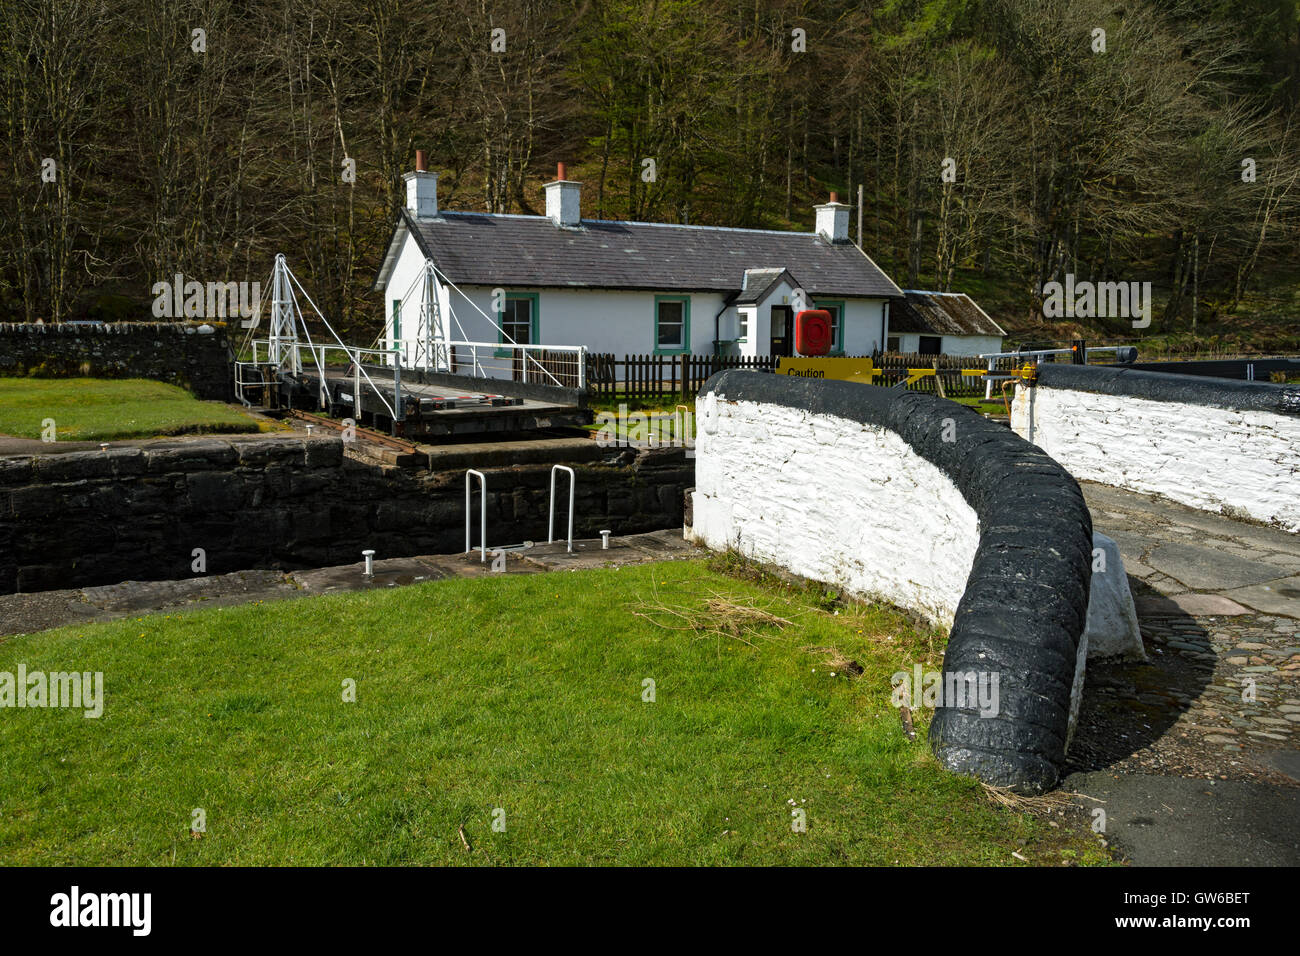 The Retractable Bridge at Dunardry, Lock 11 on the Crinan Canal, Argyll and Bute, Scotland, UK Stock Photo